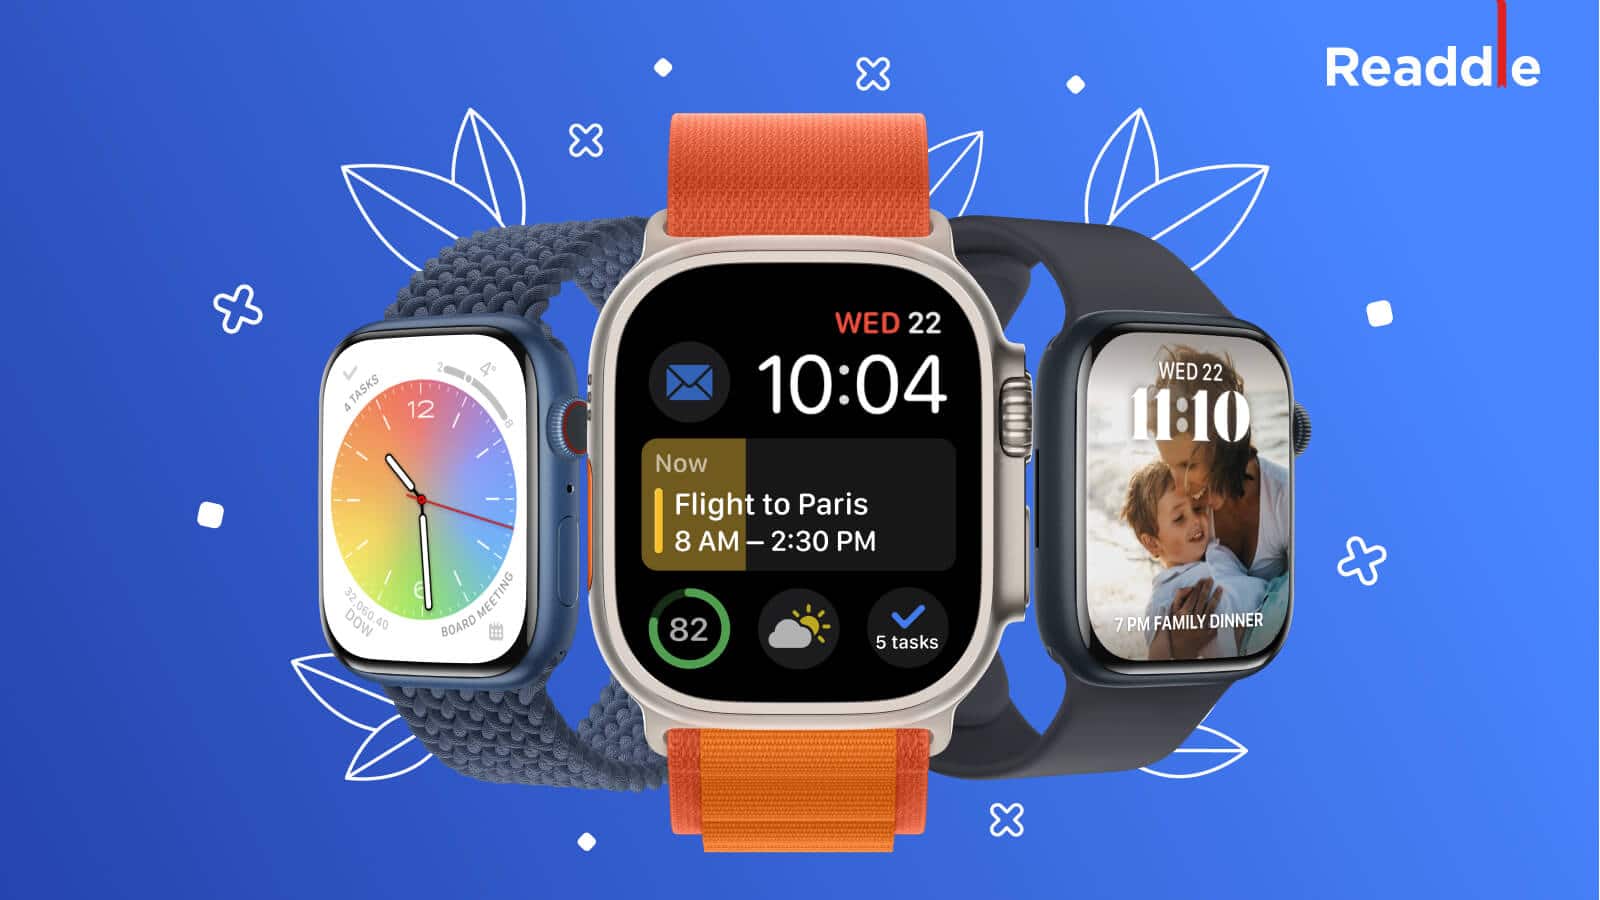 Readdle launches updated Calendars app for Apple Watch with new UI, 6 Watch Faces, and more